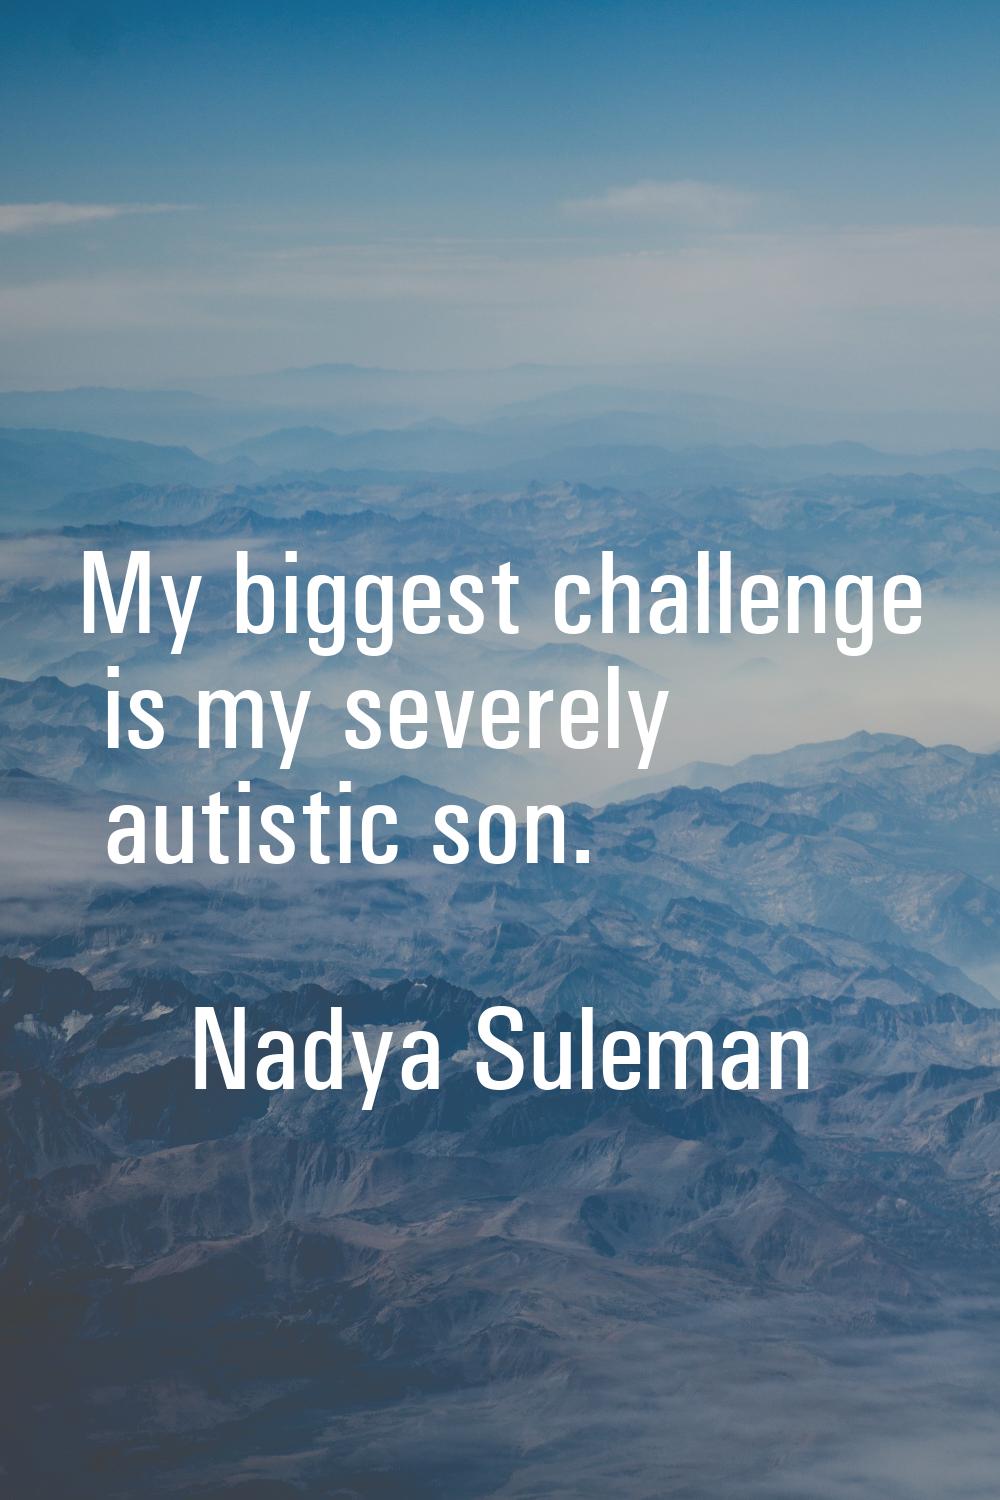 My biggest challenge is my severely autistic son.